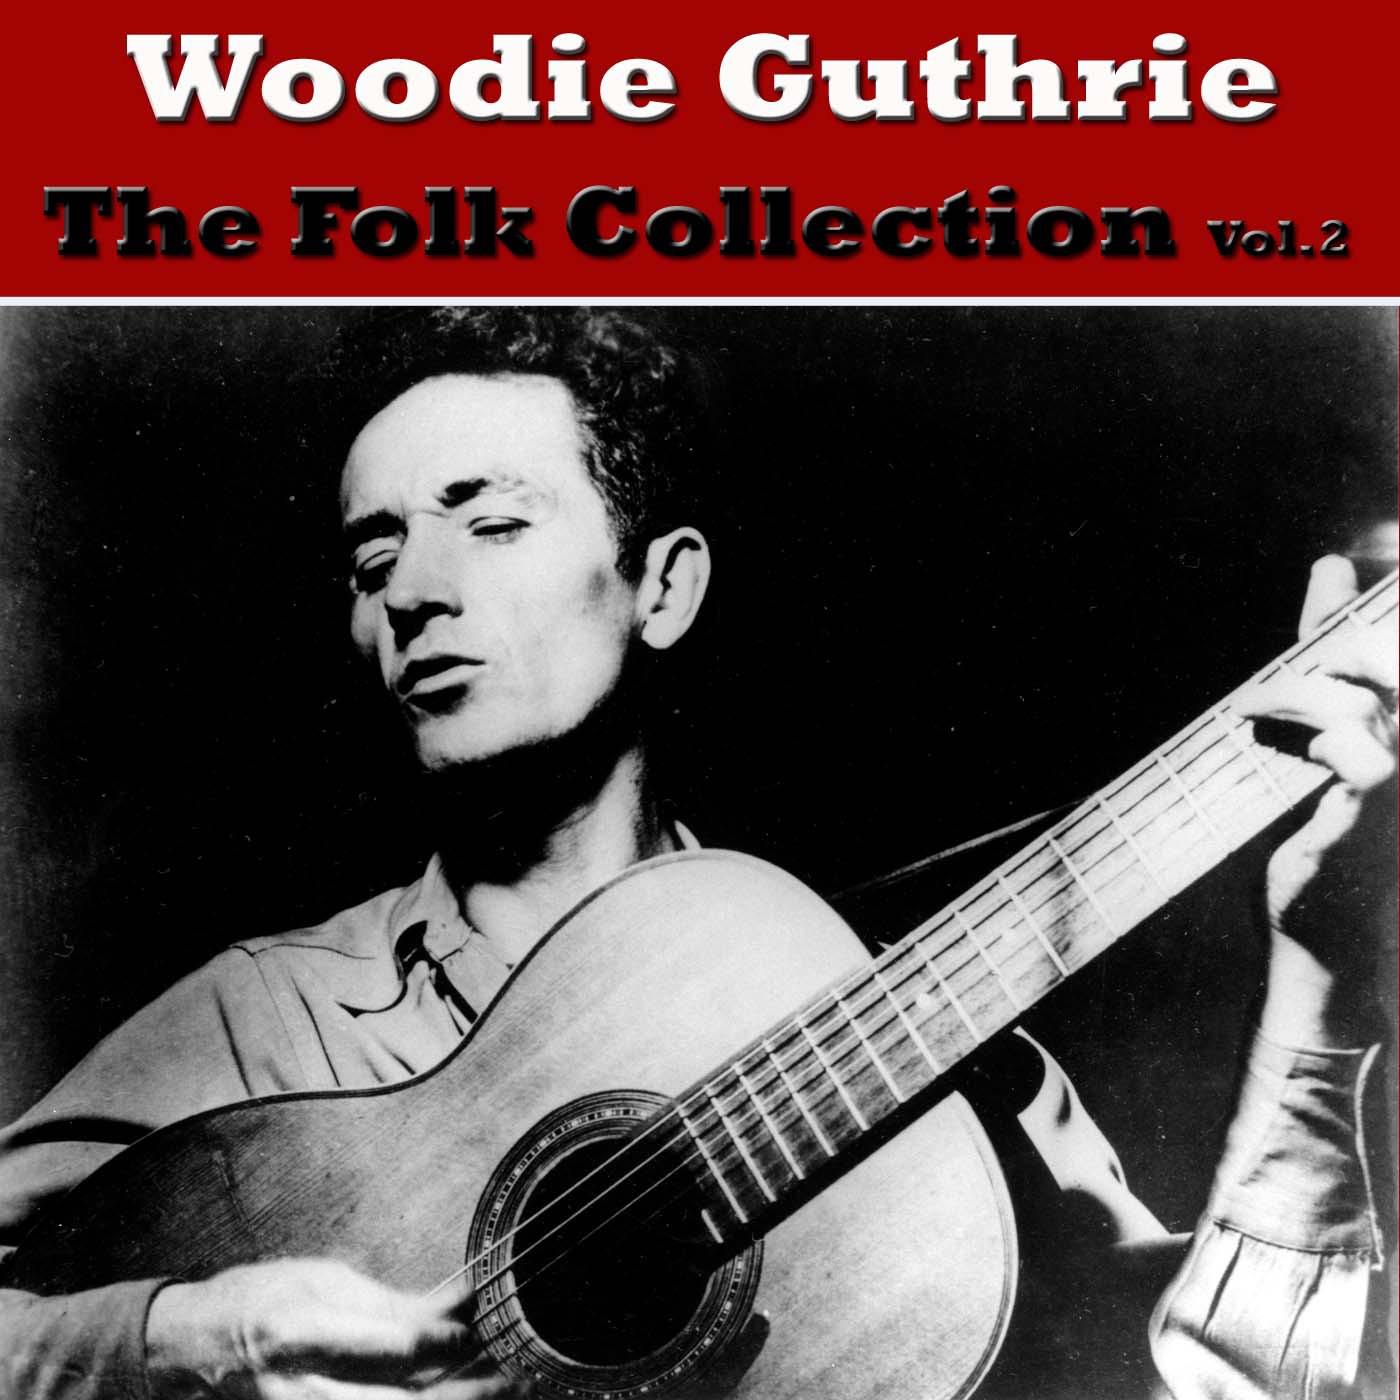 The Folk Collection, Vol. 2